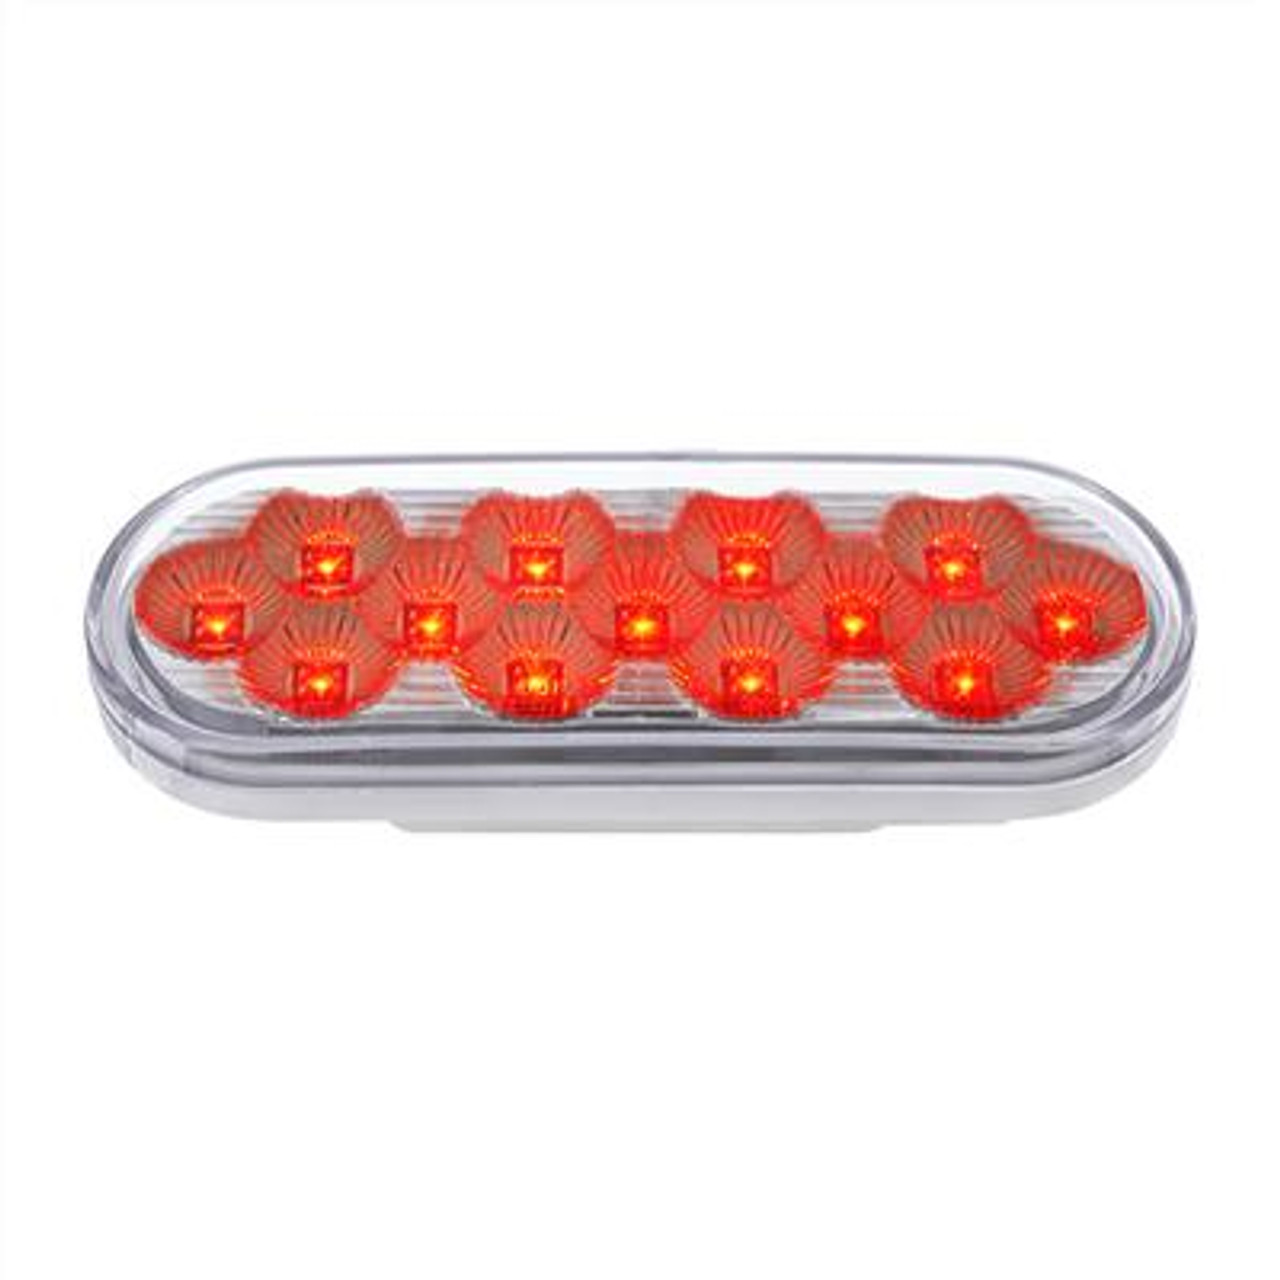 13 LED 6" Oval Double Fury (Stop, Turn & Tail) With Warning Light - Red & Amber LED/Clear Lens